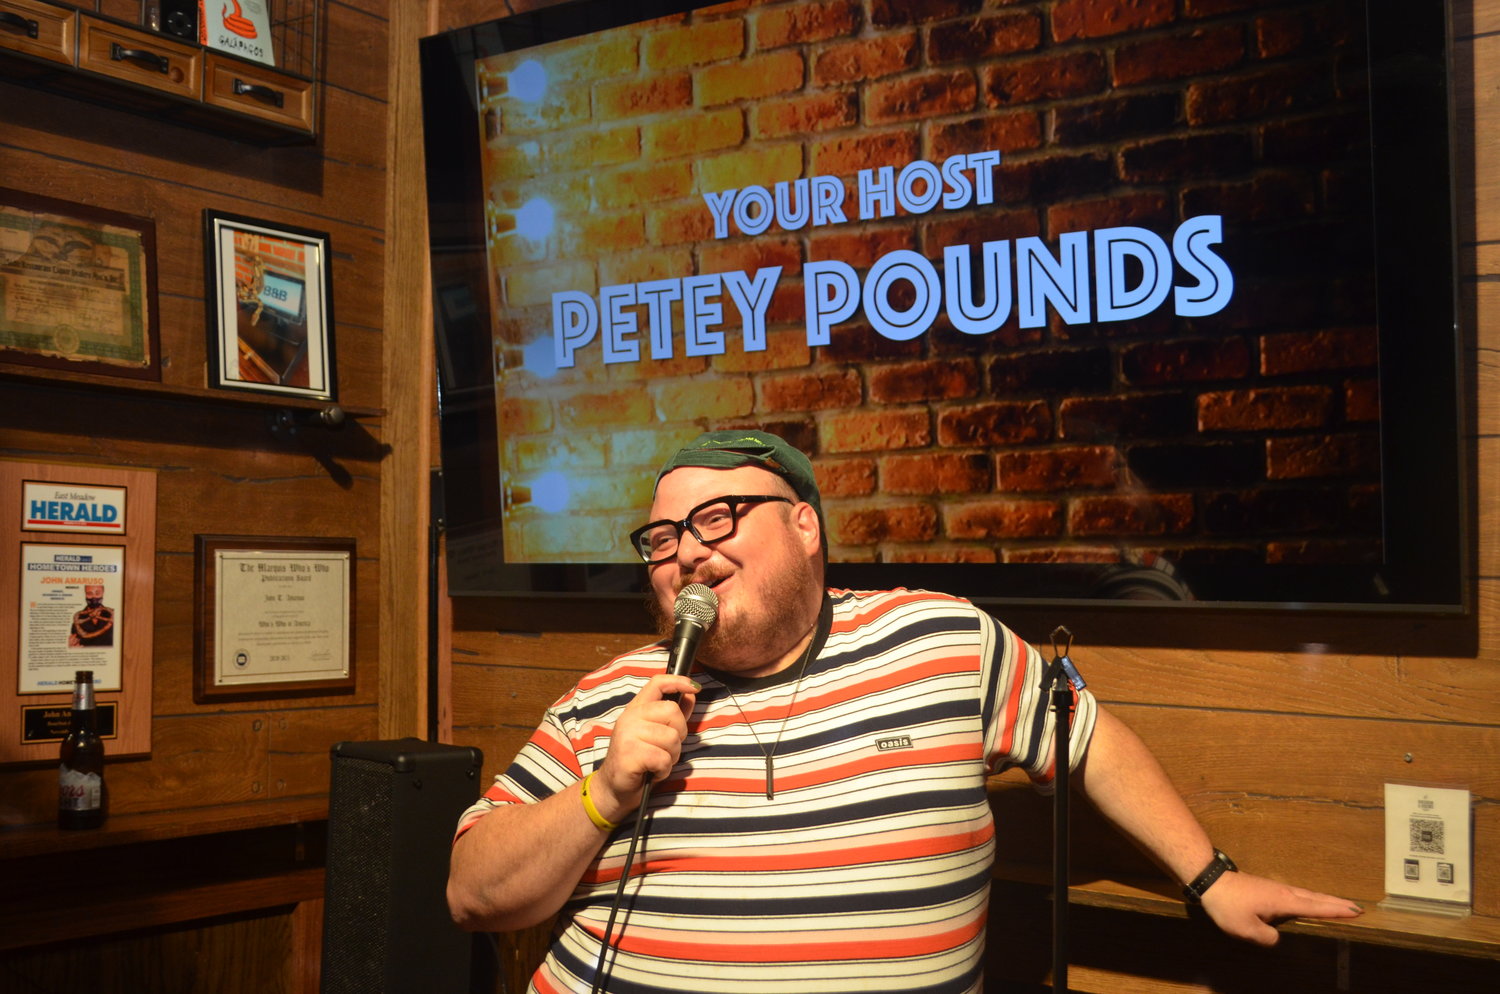 The show was hosted by Petey Pounds who also told a few jokes himself, and introduced each of the comedians.